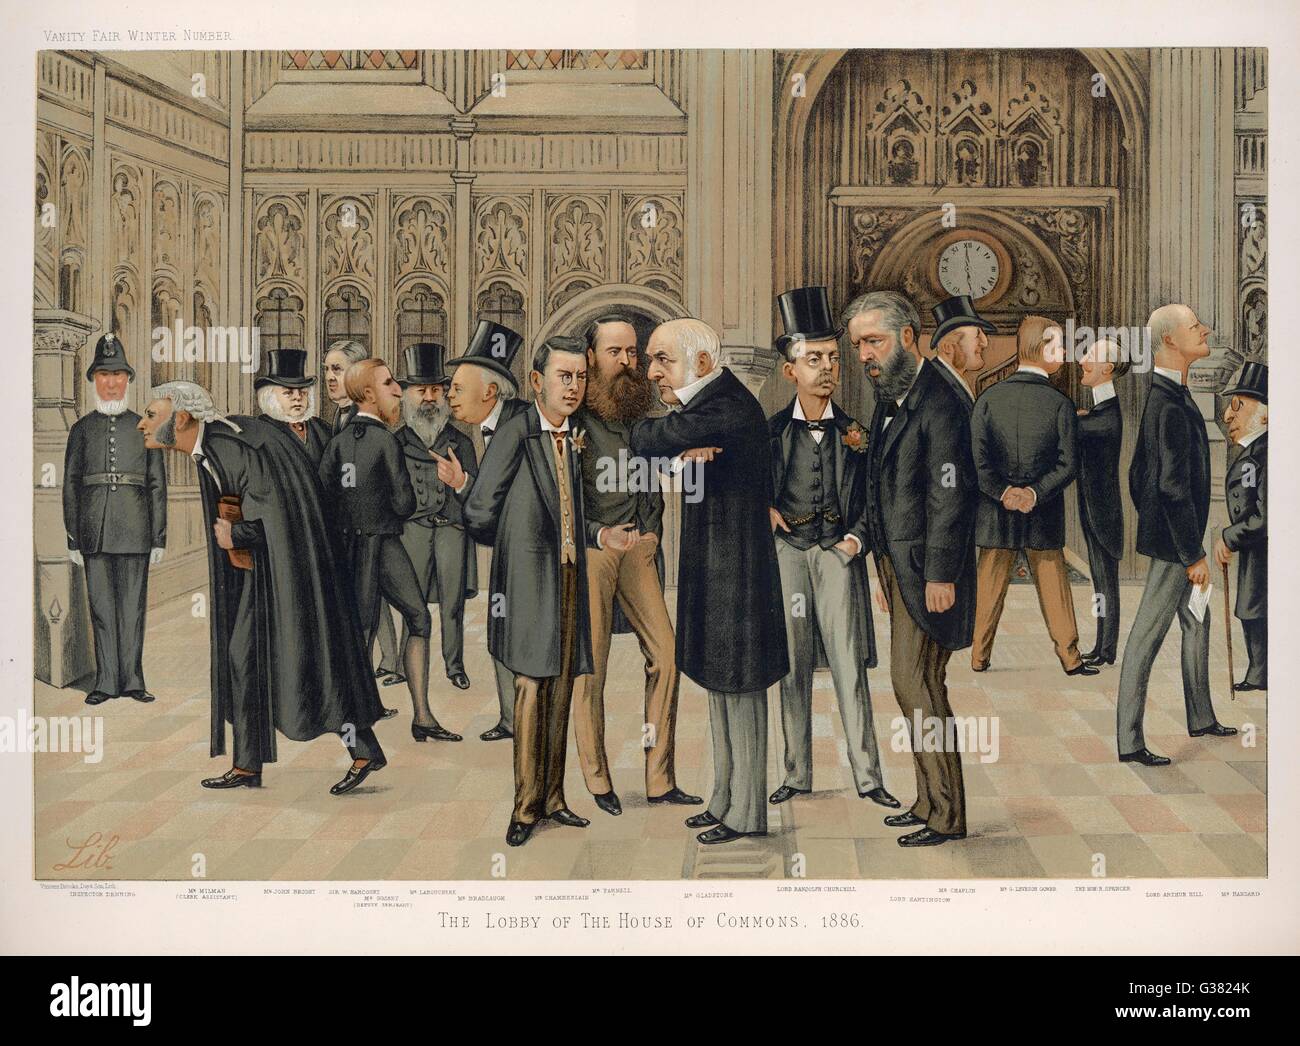 Eminent politicians including  Gladstone, Randolph Churchill  and Charles Stewart Parnell  gather in the Commons Lobby       Date: 1886 Stock Photo